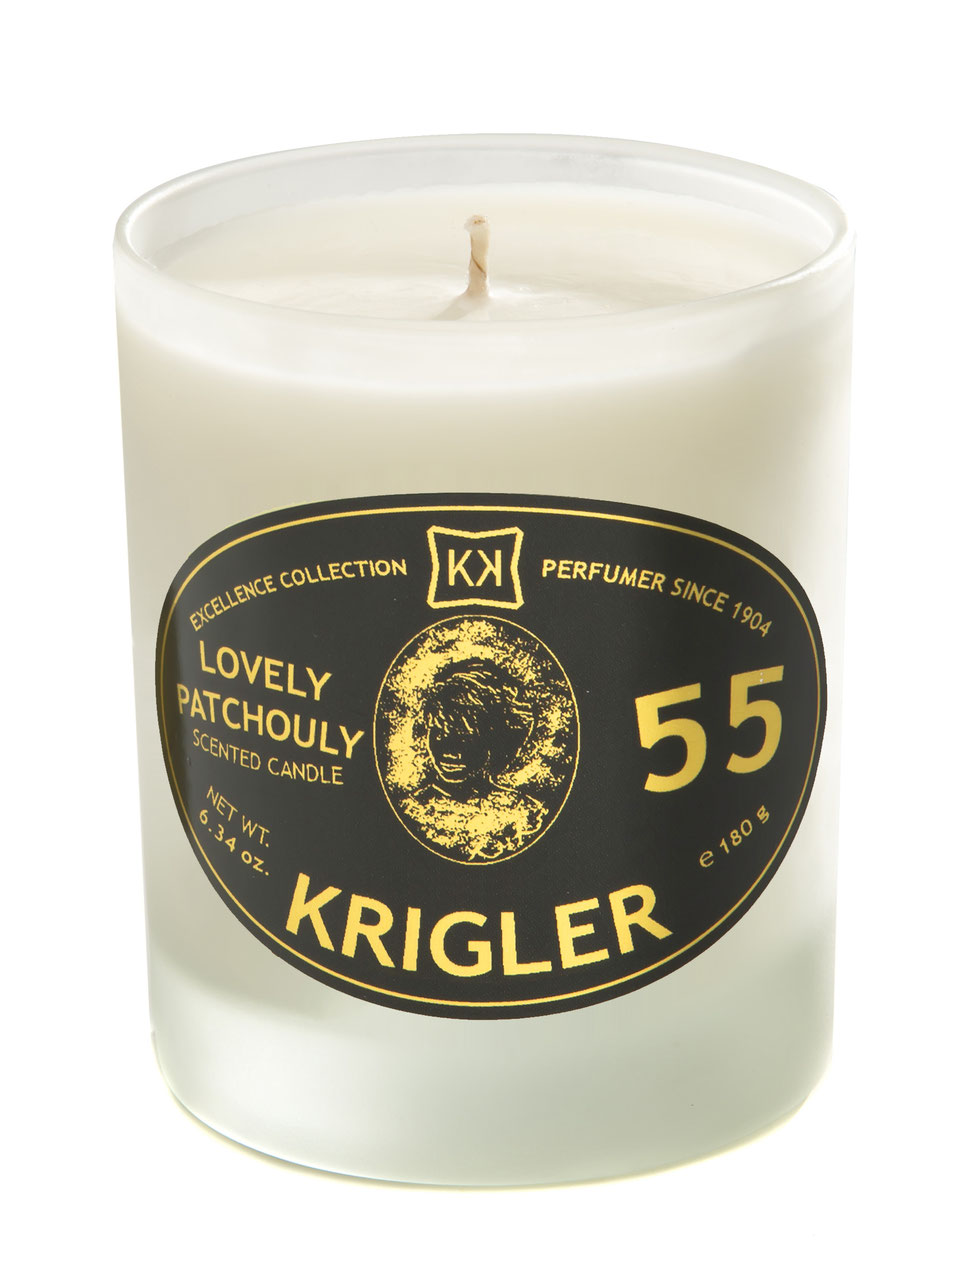 LOVELY PATCHOULI 55 CLASSIC Scented candle